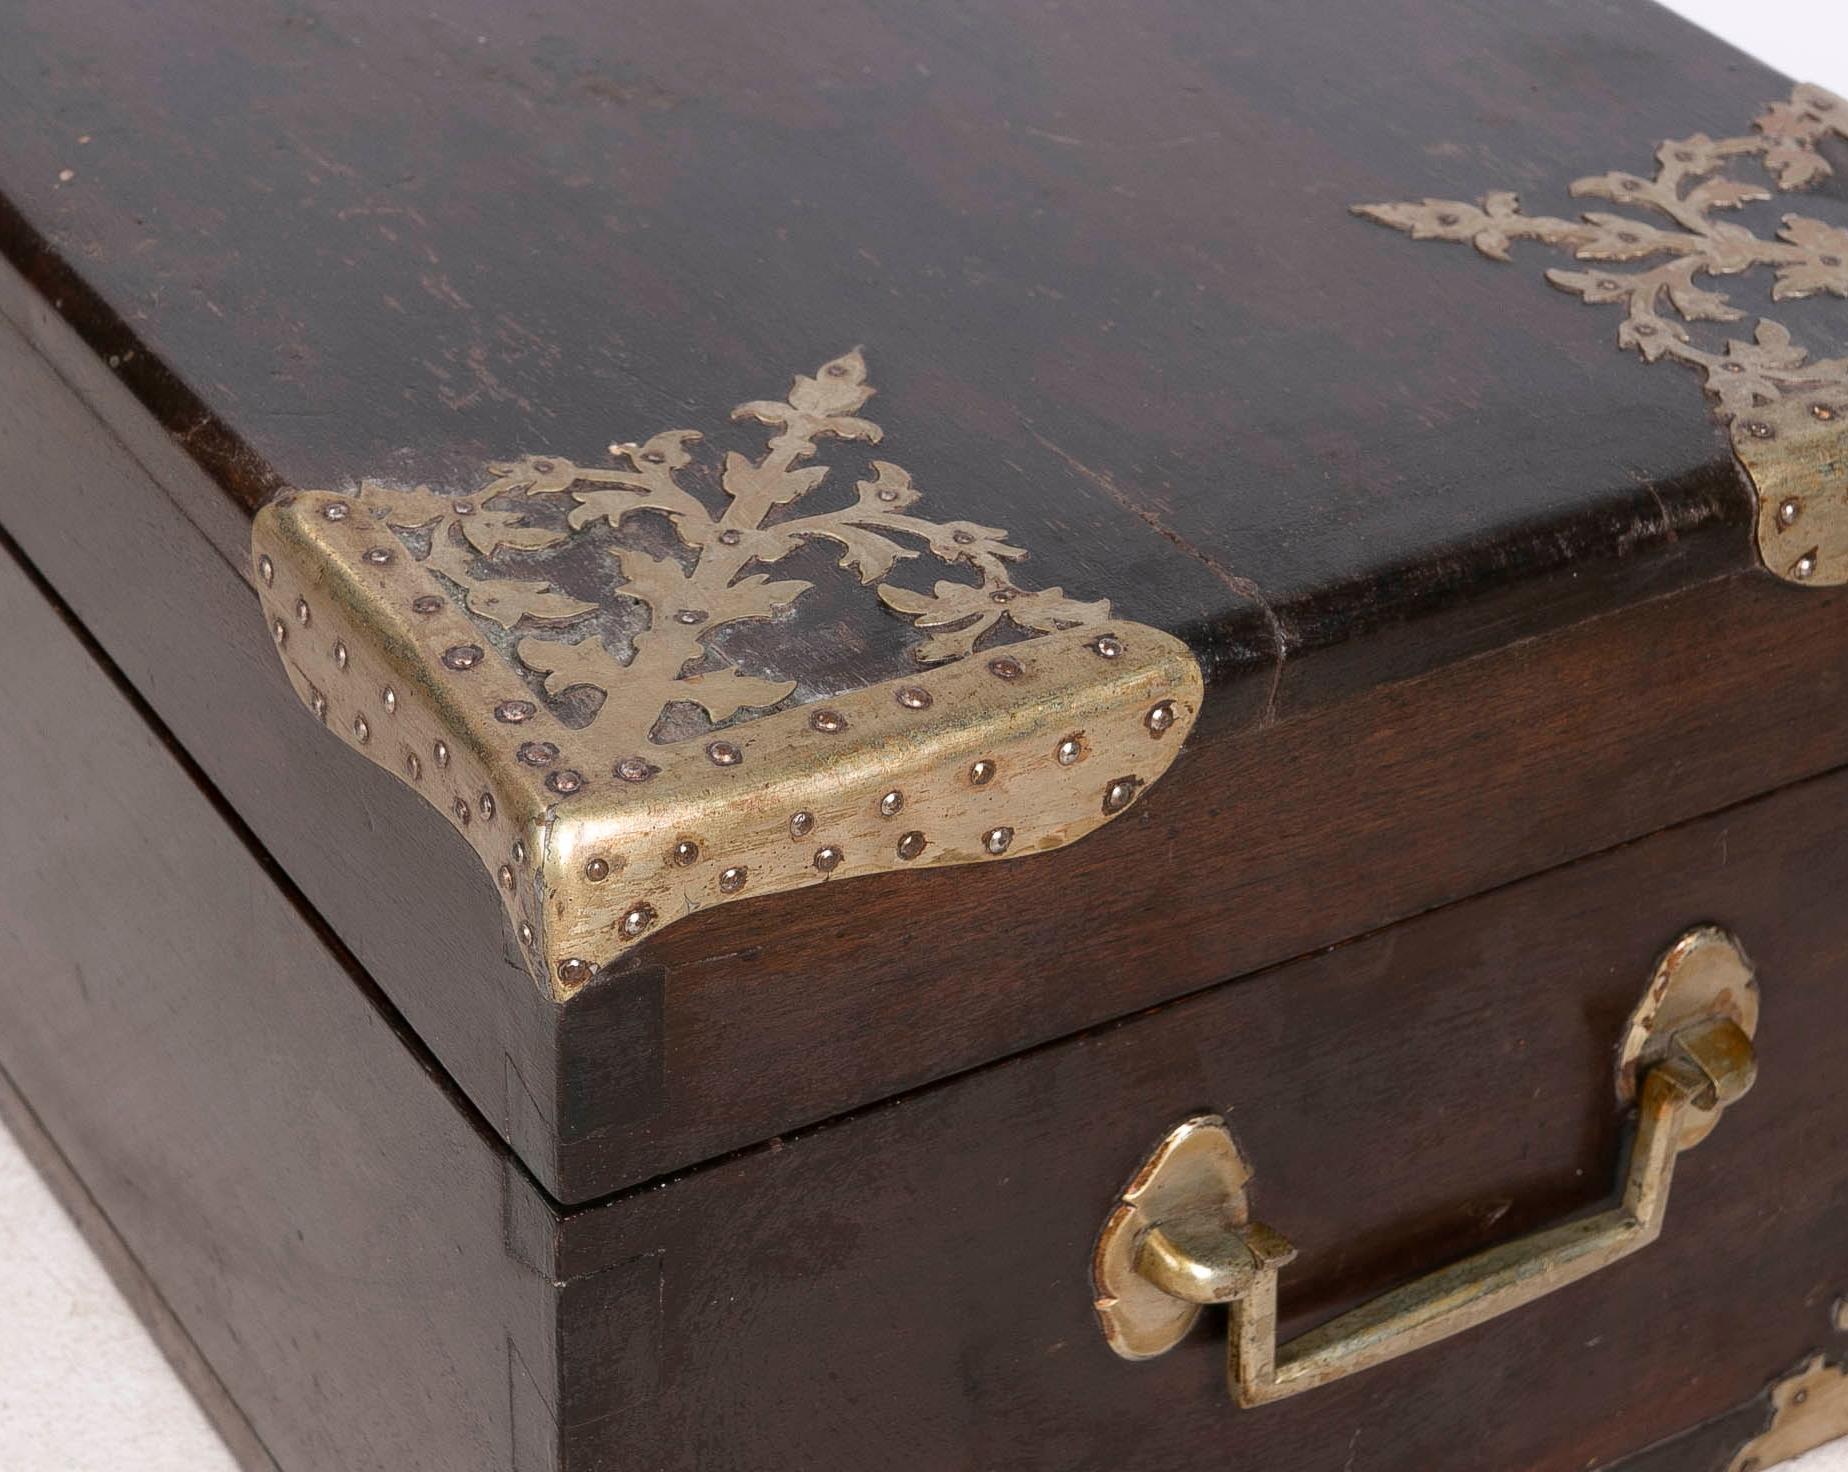 Italian Rectangular Wooden Box with Metal Decorations and Inscription dated 1891 For Sale 9